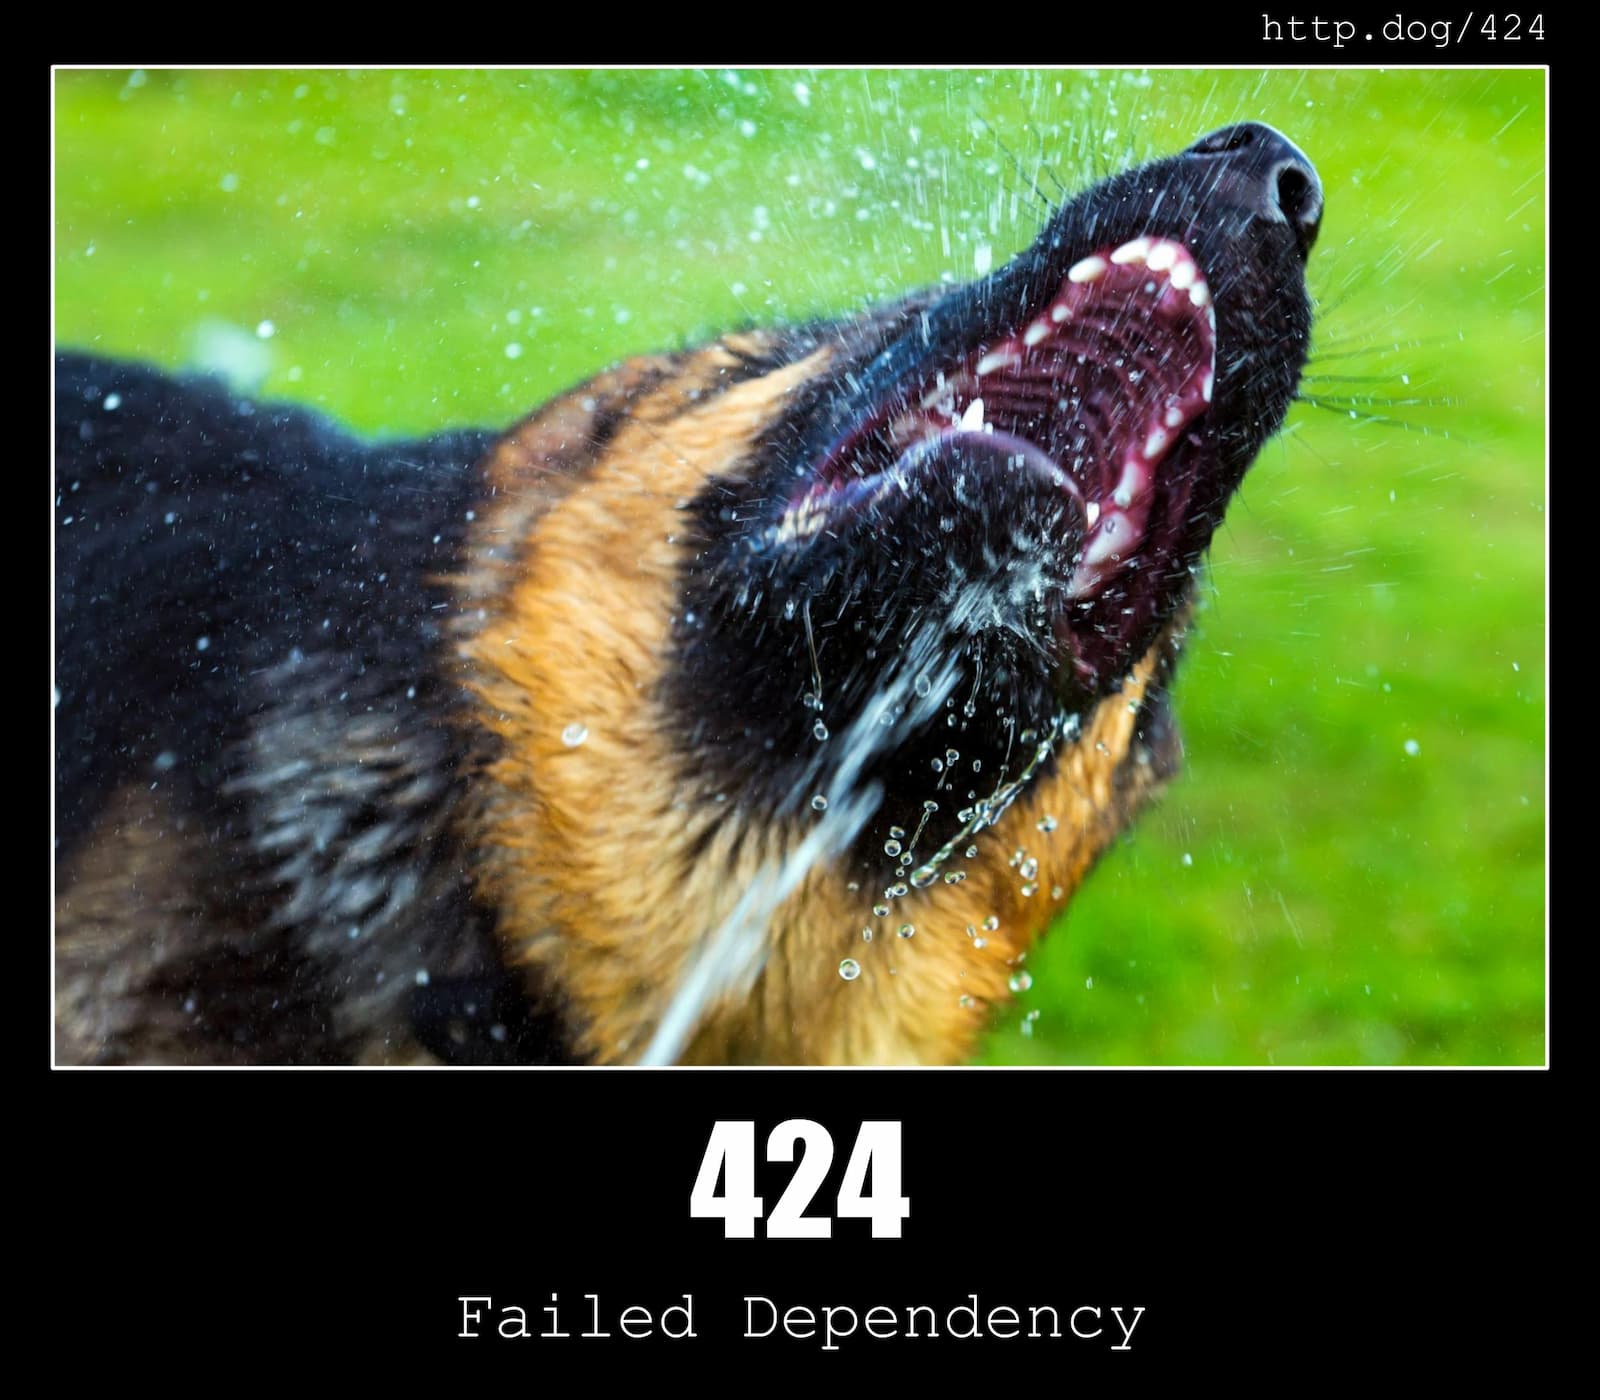 HTTP Status Code 424 Failed Dependency